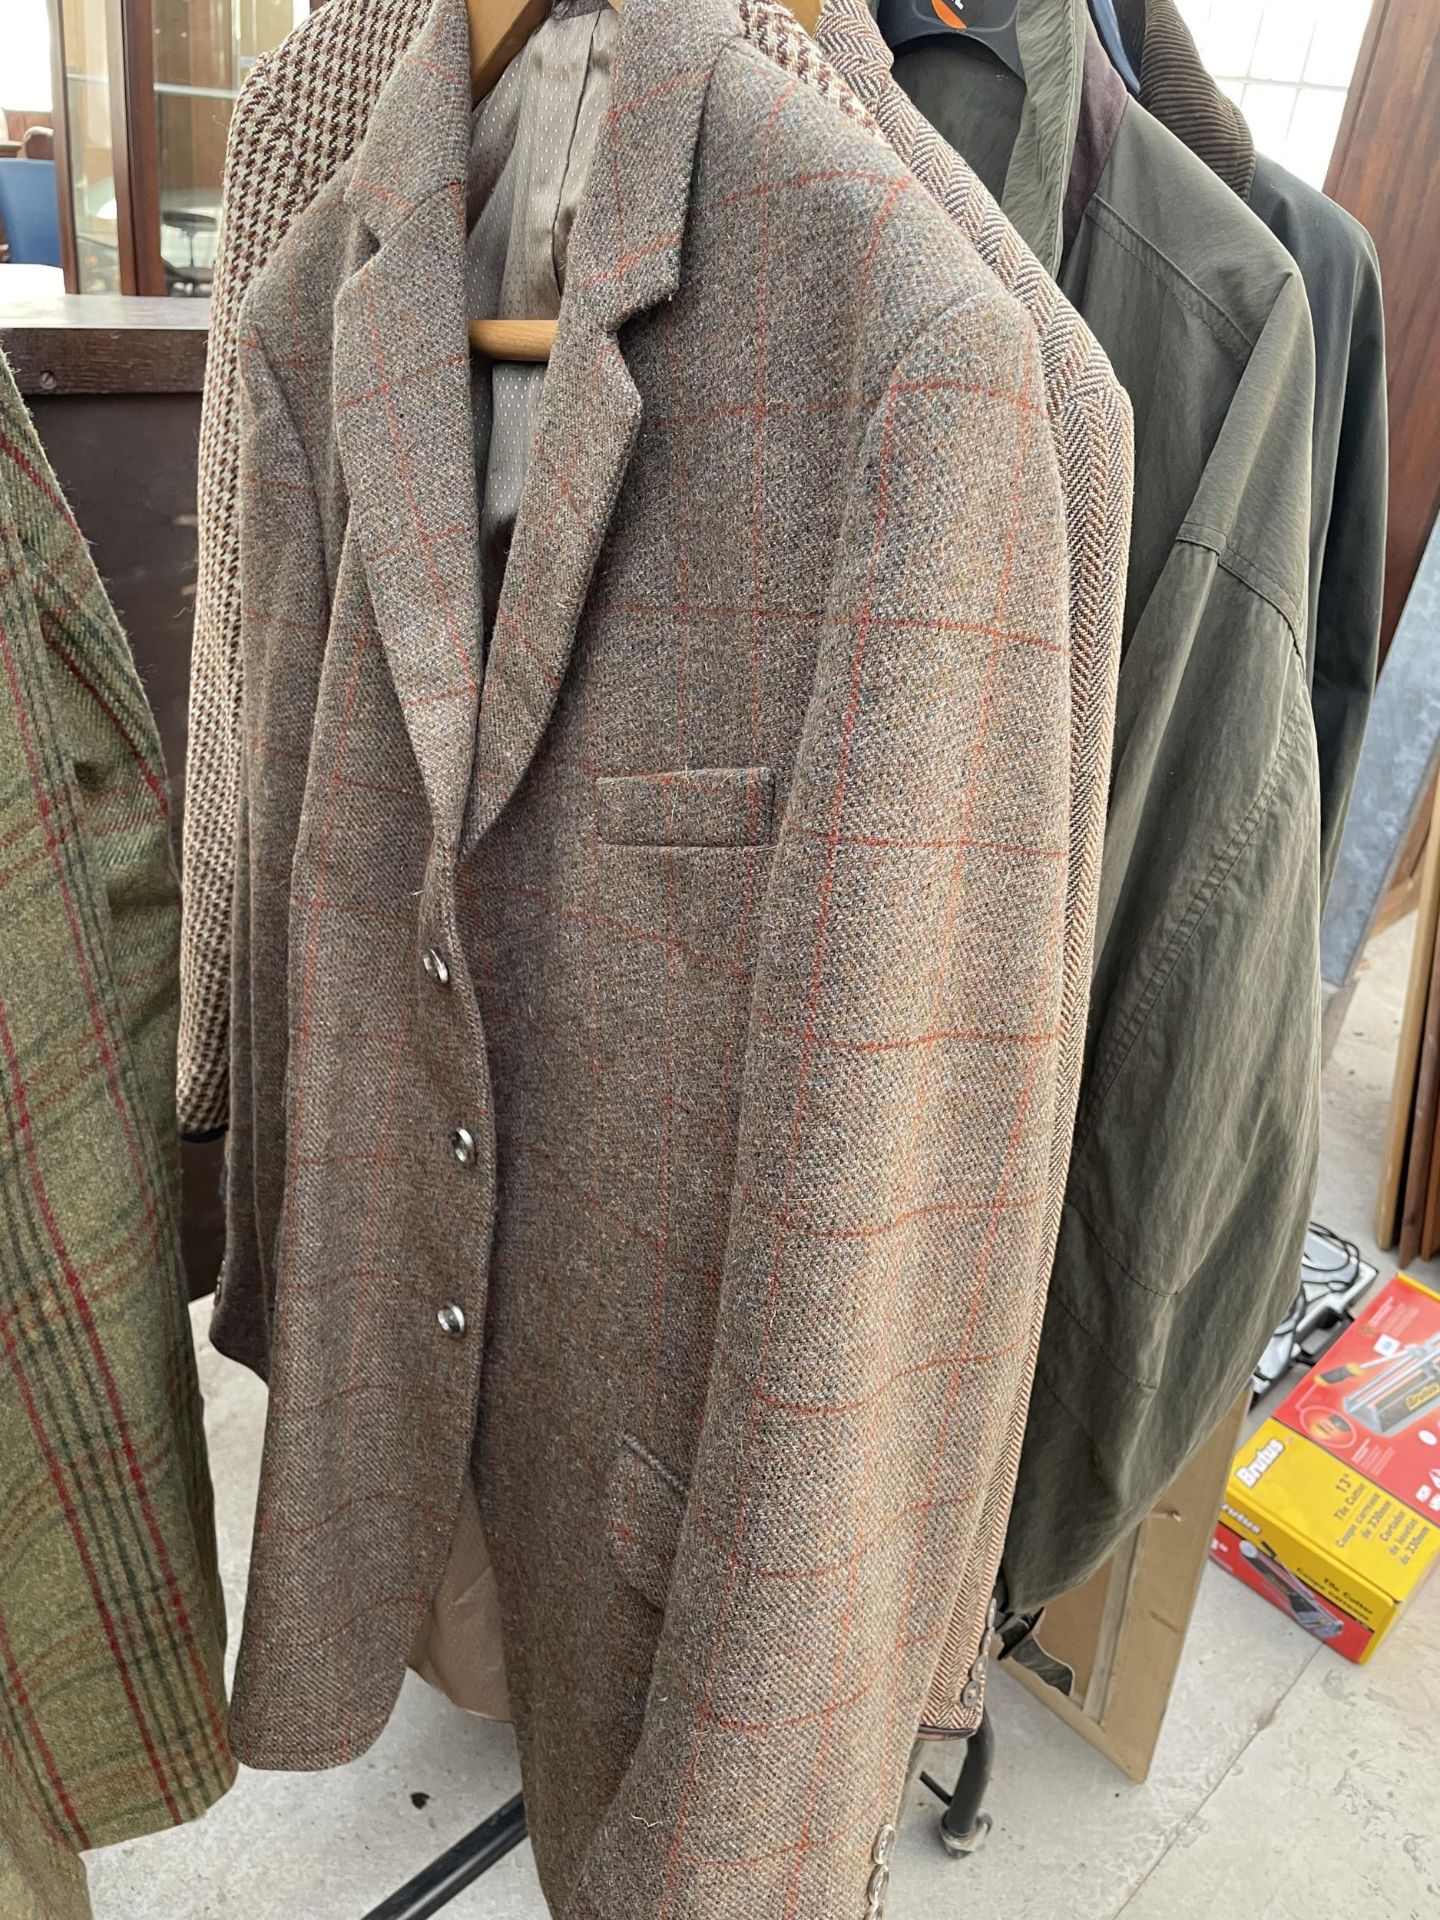 AN ASSORTMENT OF TWEED JACKETS - Image 8 of 12